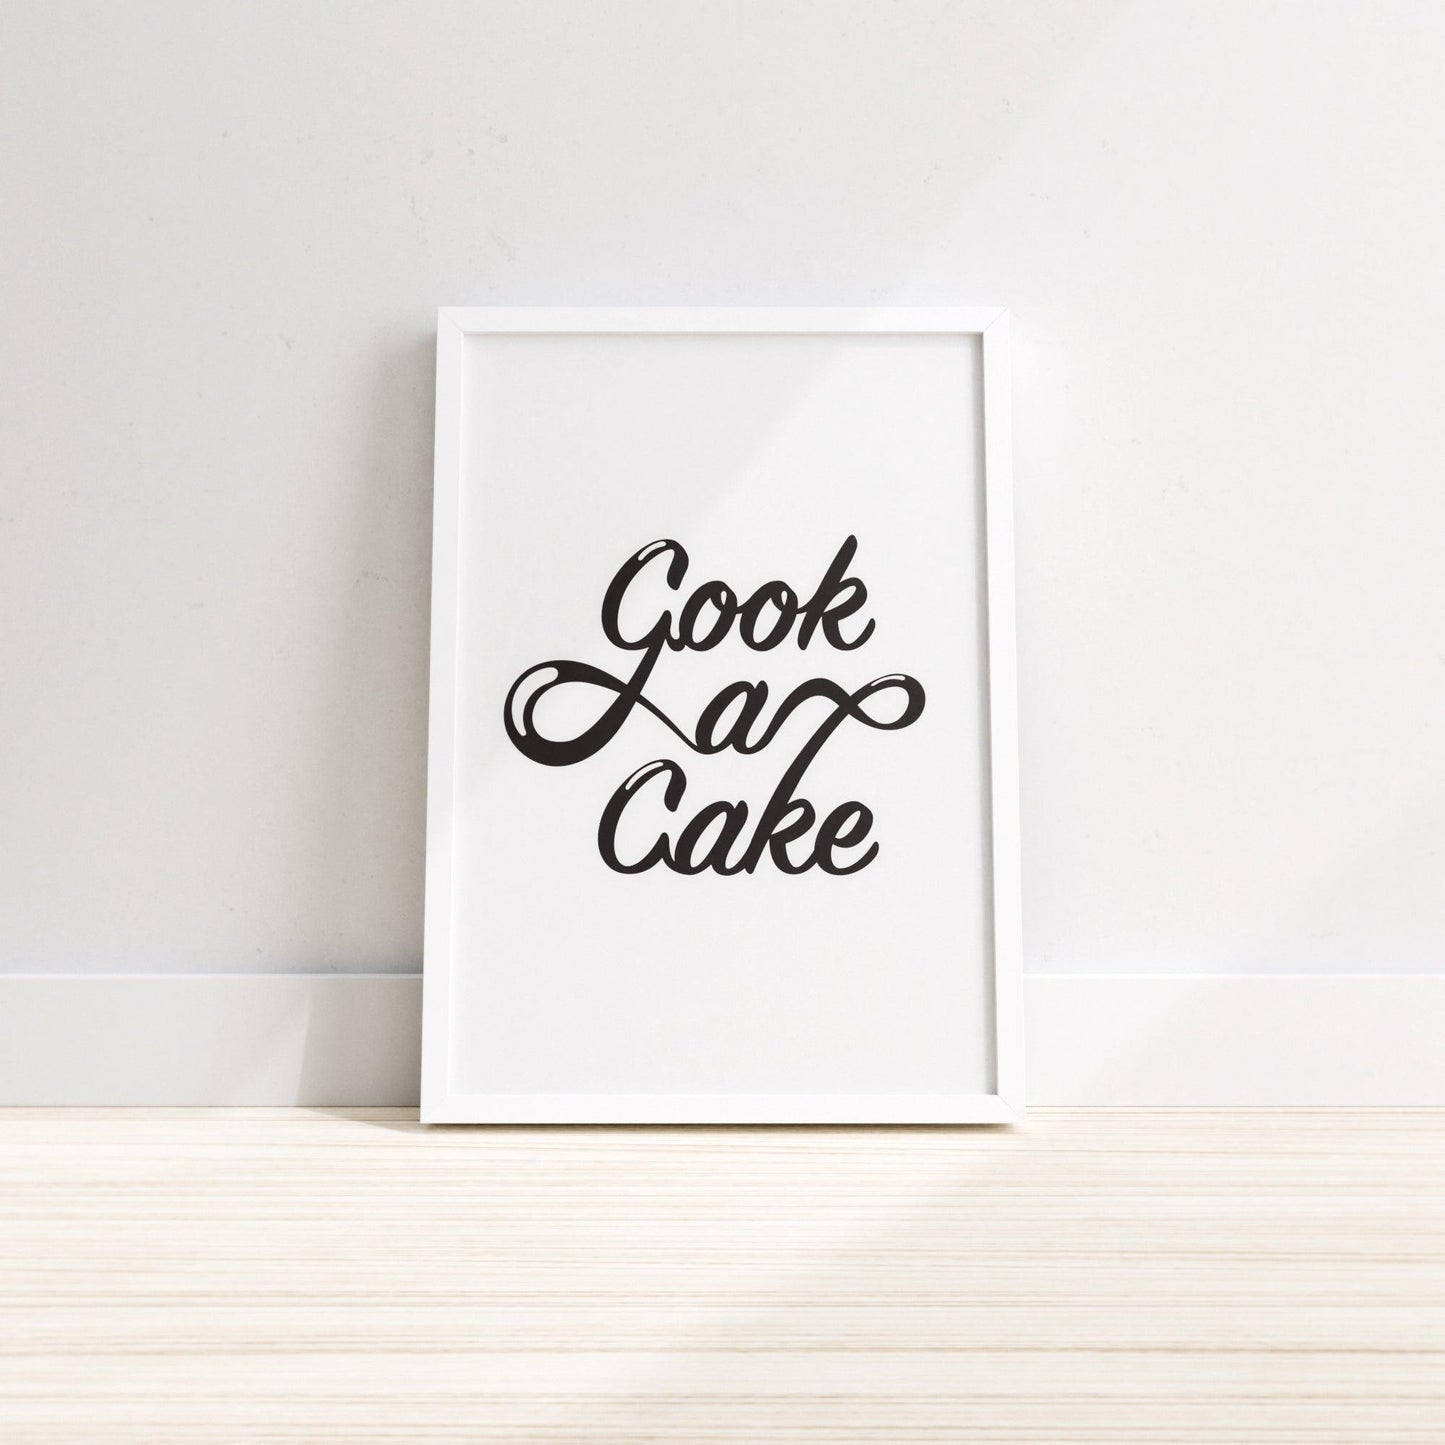 Cook a cake &#8211; Dining room Wall Decor,Kitchen Wall Decor, Wall Print, Kitchen Wall Art, Dining room Print